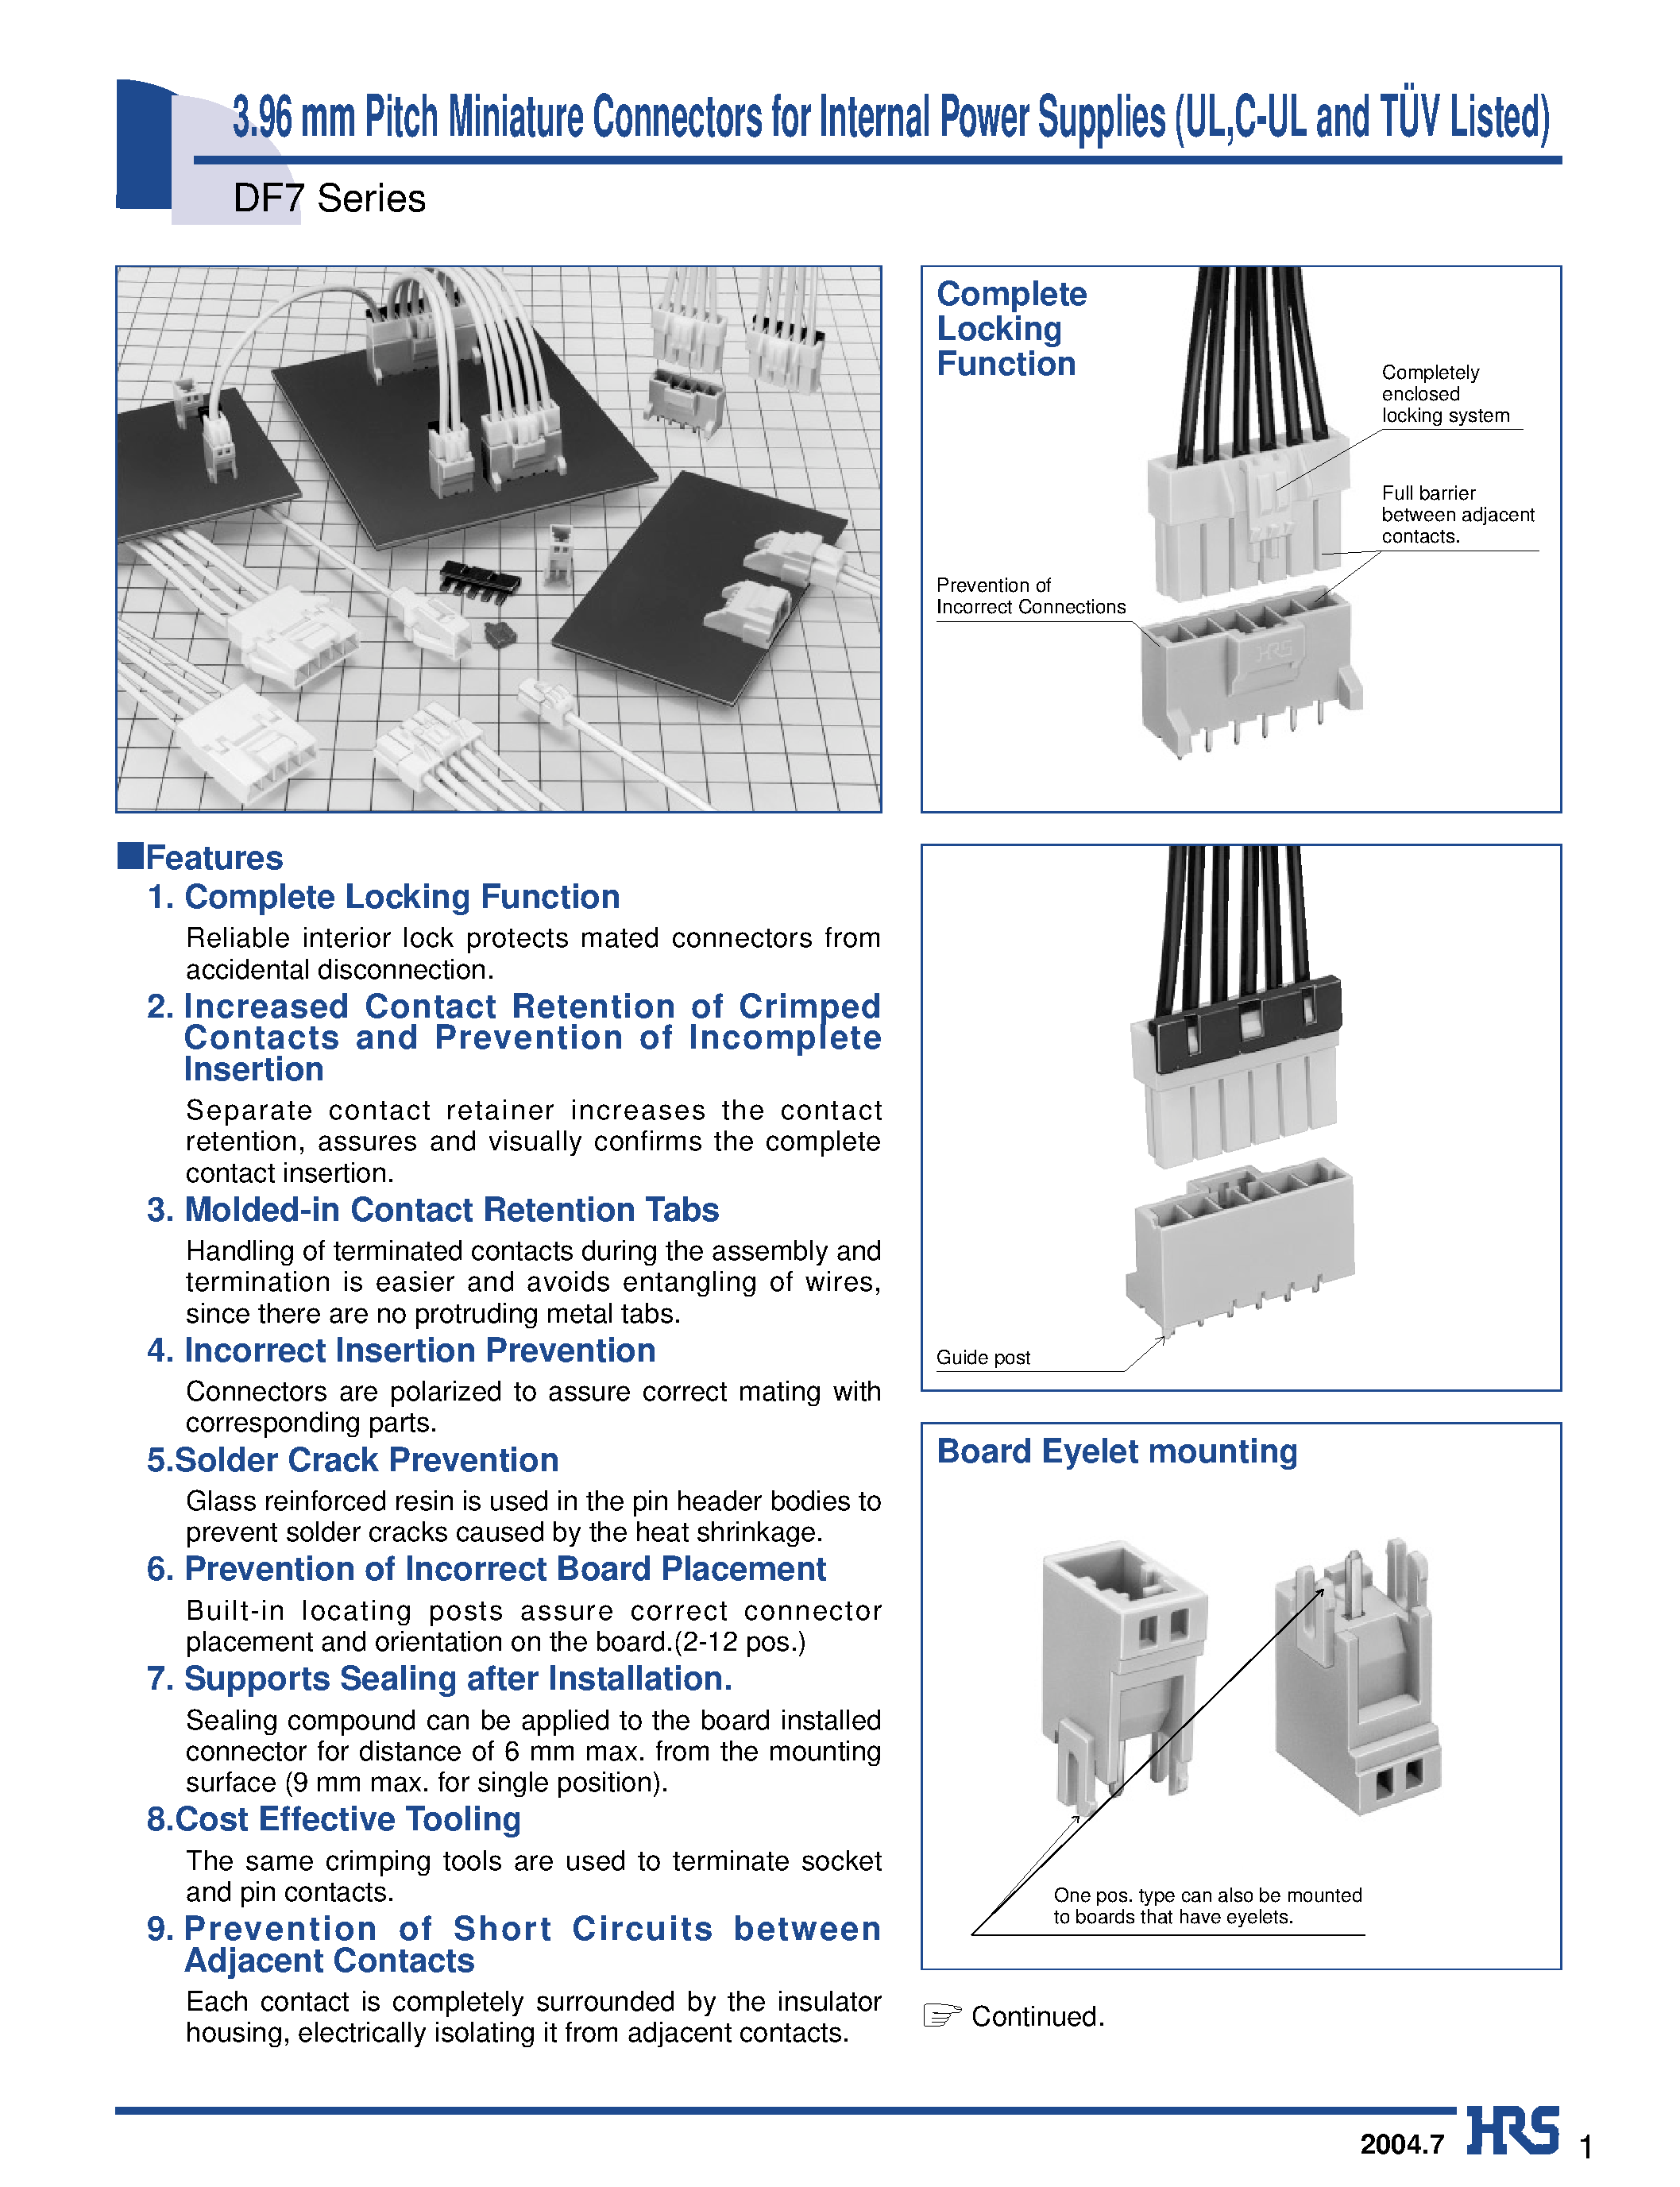 Datasheet DF7-3DS-3.96C - 3.96 mm Pitch Miniature Connectors for Internal Power Supplies (UL /C-UL and TUV Listed) page 1